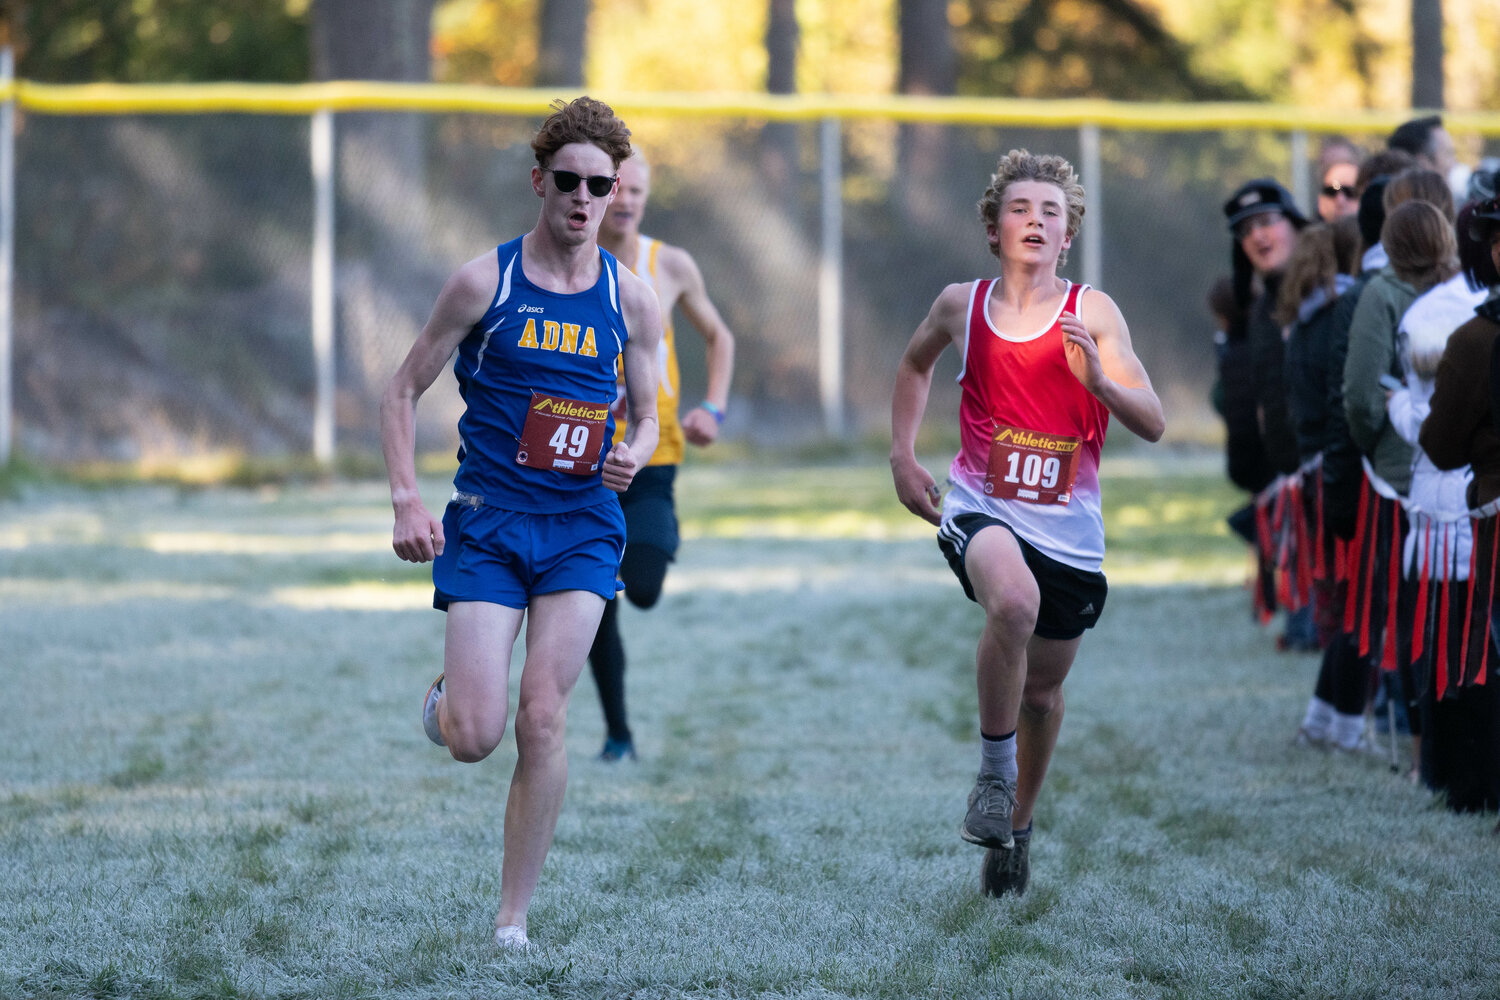 Adna's Bailey Davis (left) beats out Oakville's Cecil Gumaelius (right) down the homestretch in the boys' race at the 1B/2B District 4 cross country championship meet on Oct. 28 in Rainier.